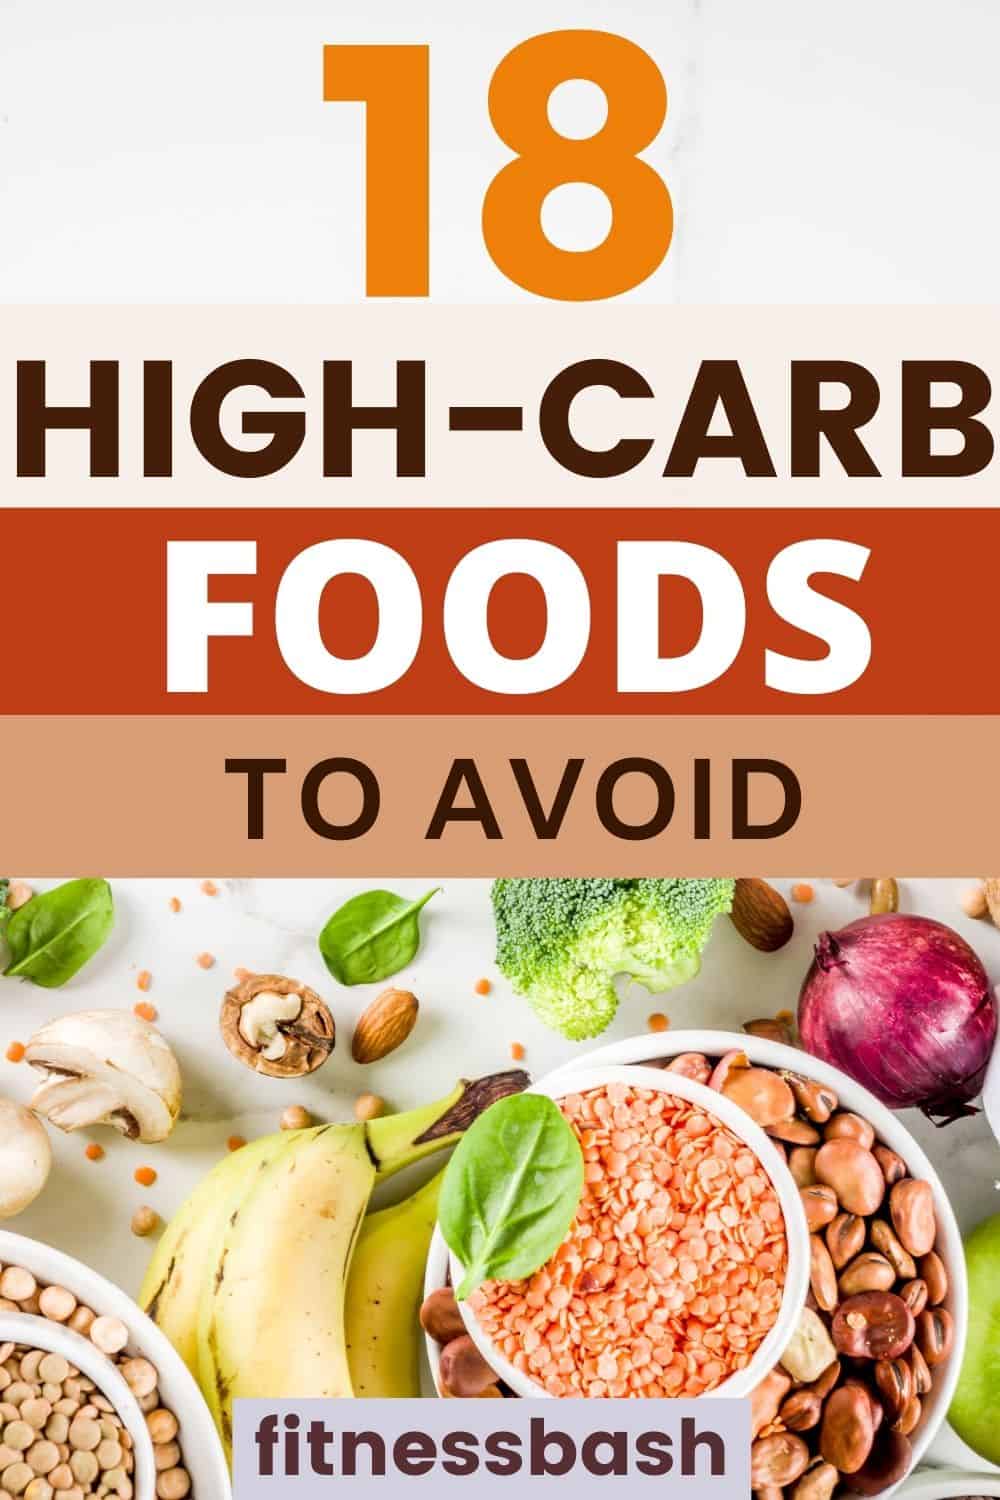 high-carb foods to avoid